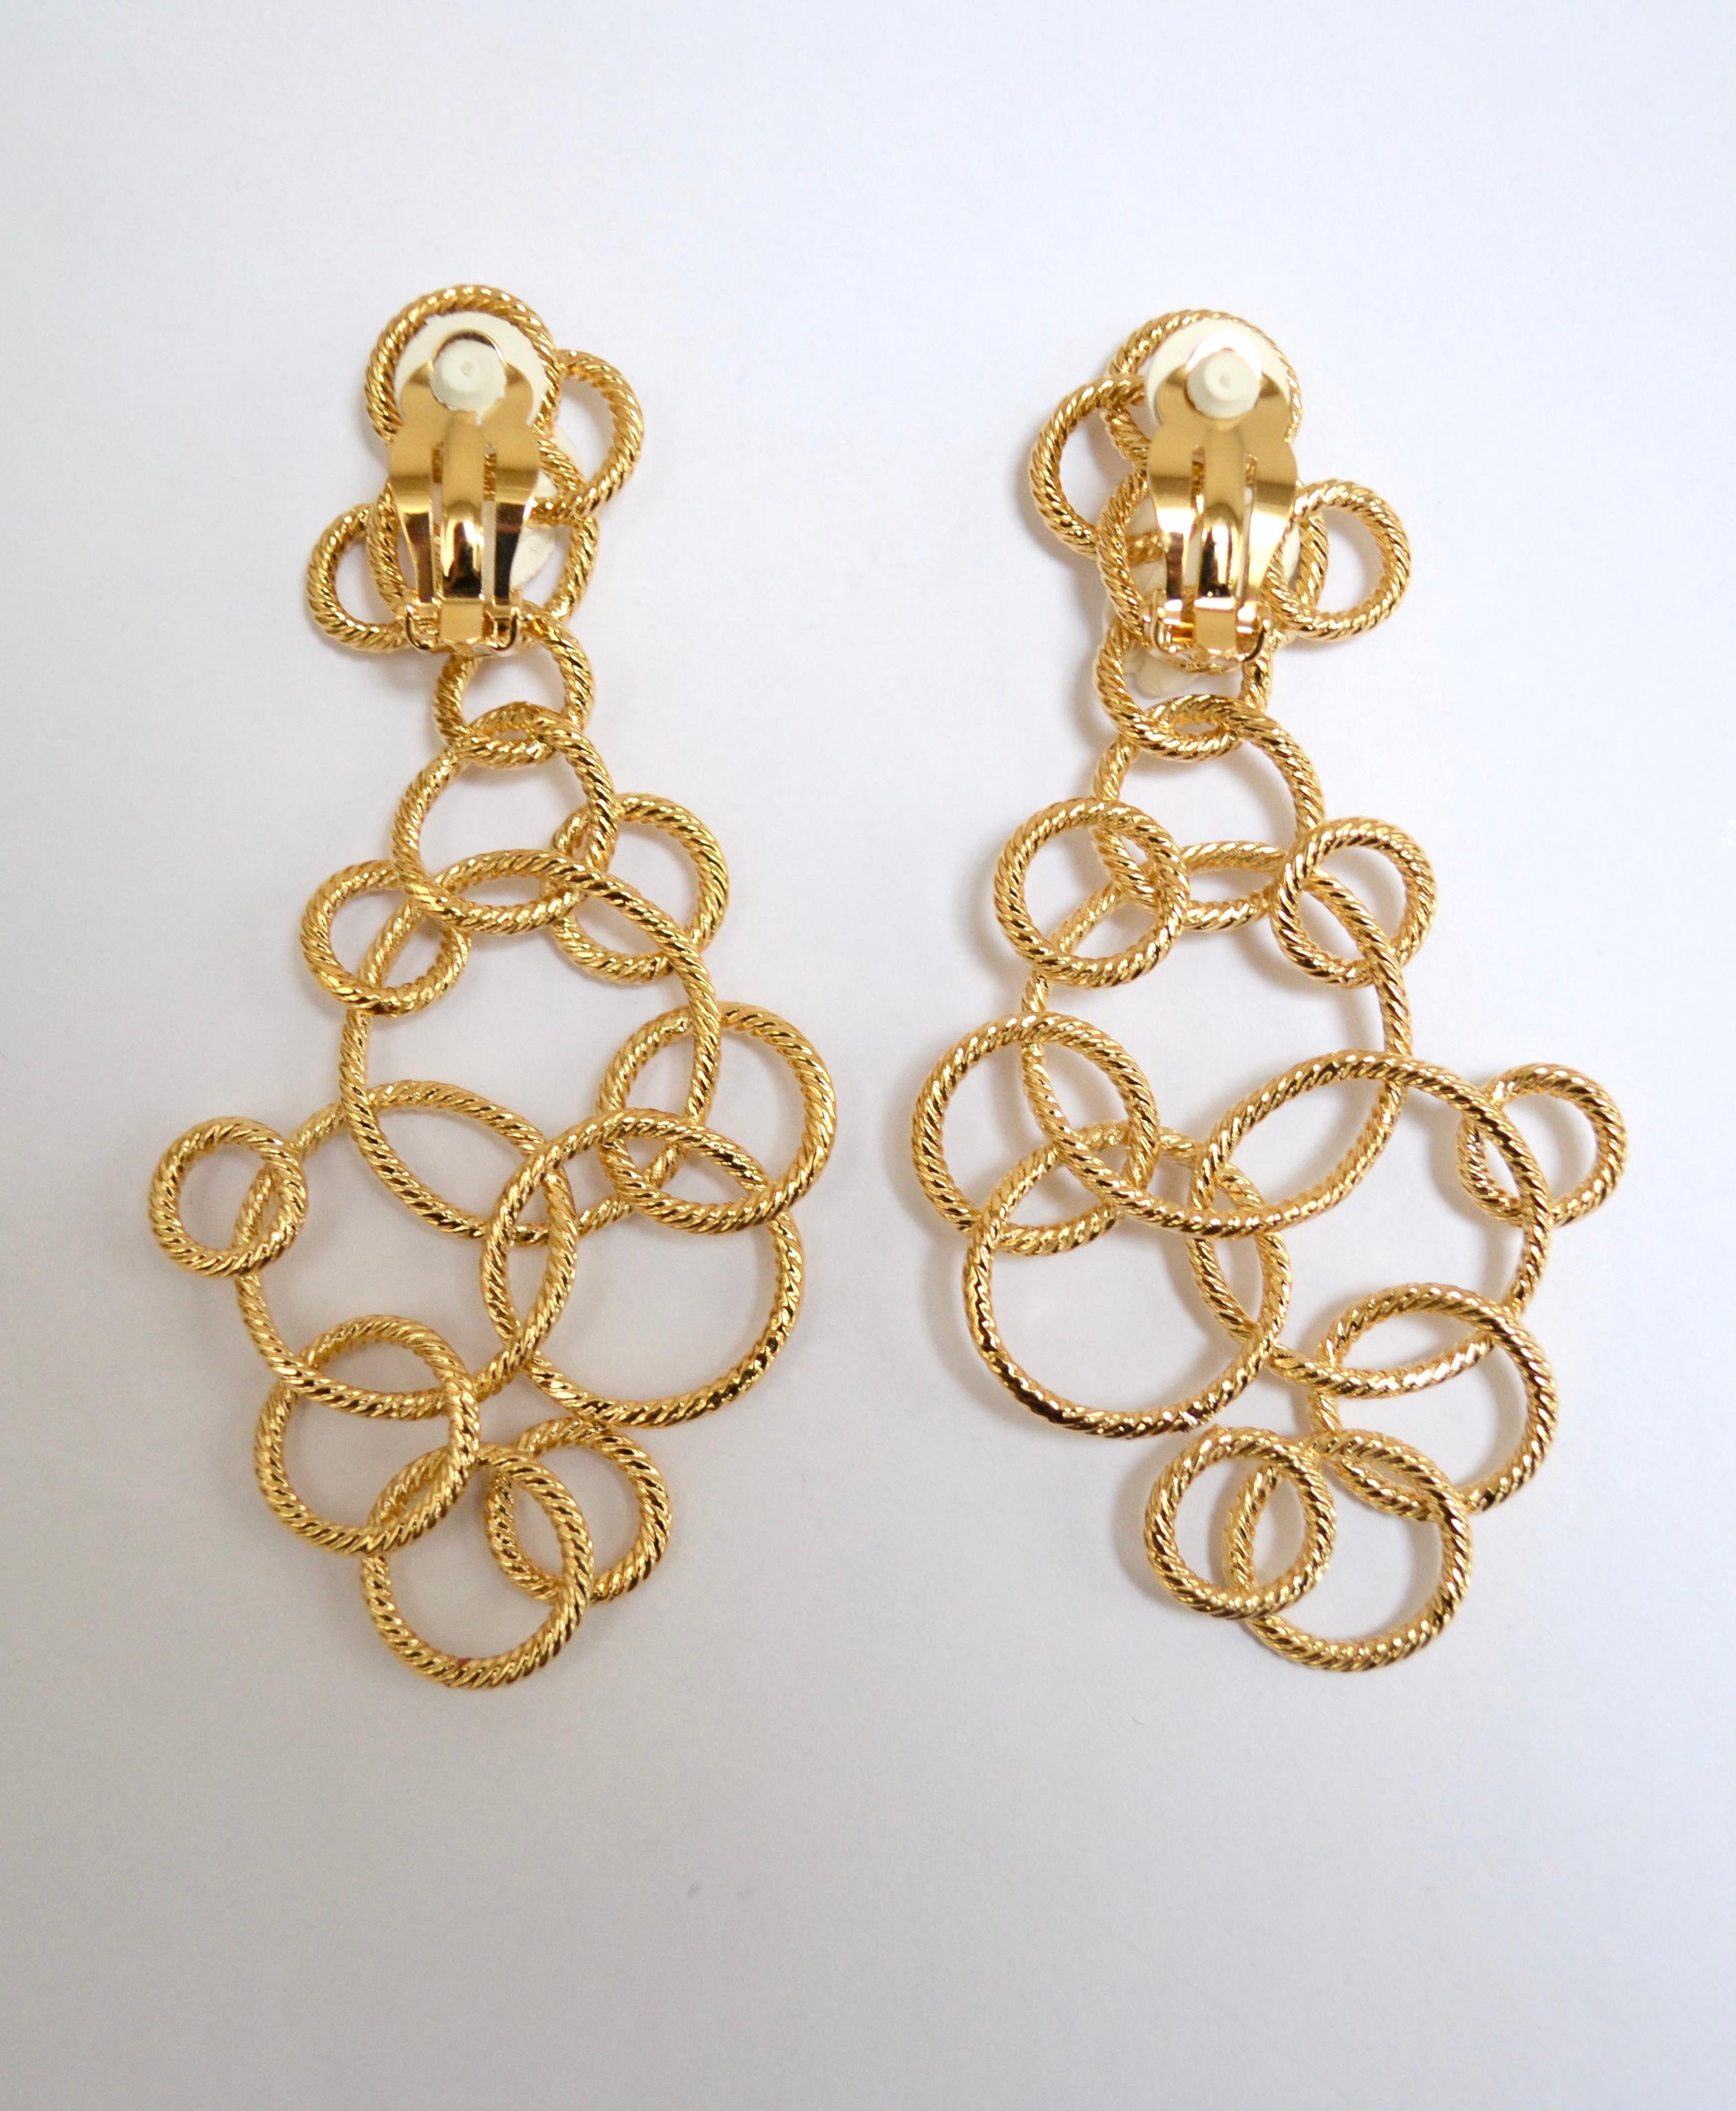 24-carat gilded bronze braided metal.An intricate design of different circles create an amazing statement earring.
Sylvie Blet , the designer, was Robert Goossens personal assistant in all of his creations. She worked by his side for 20 years